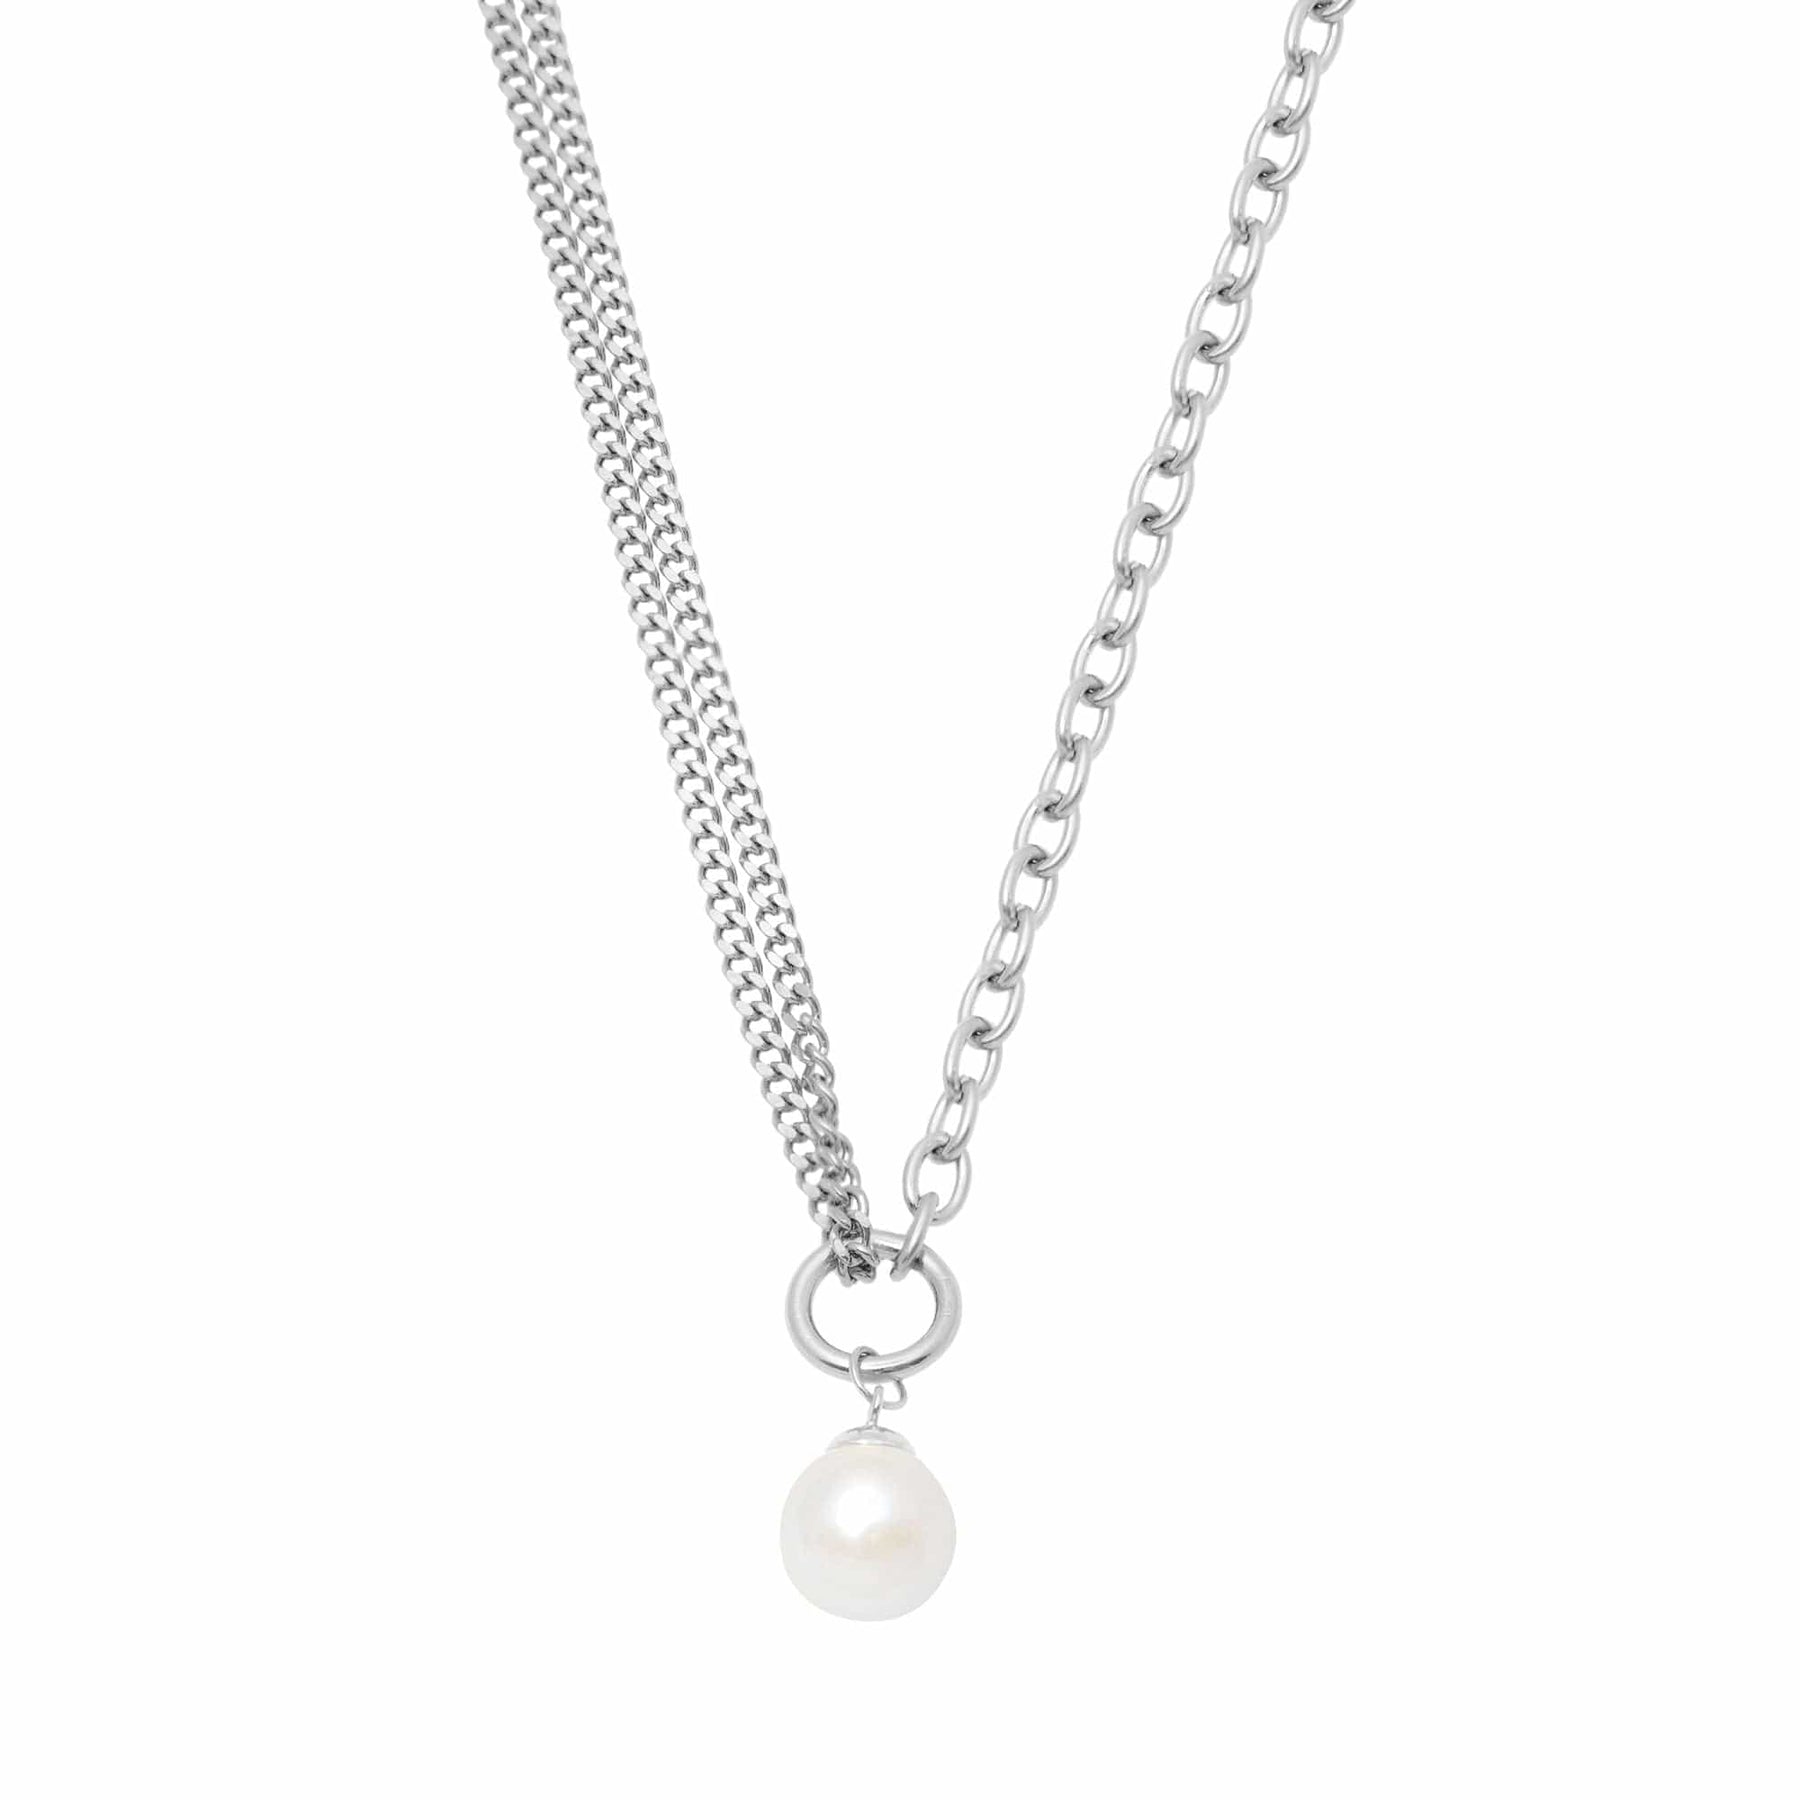 BohoMoon Stainless Steel Saffron Pearl Necklace Silver